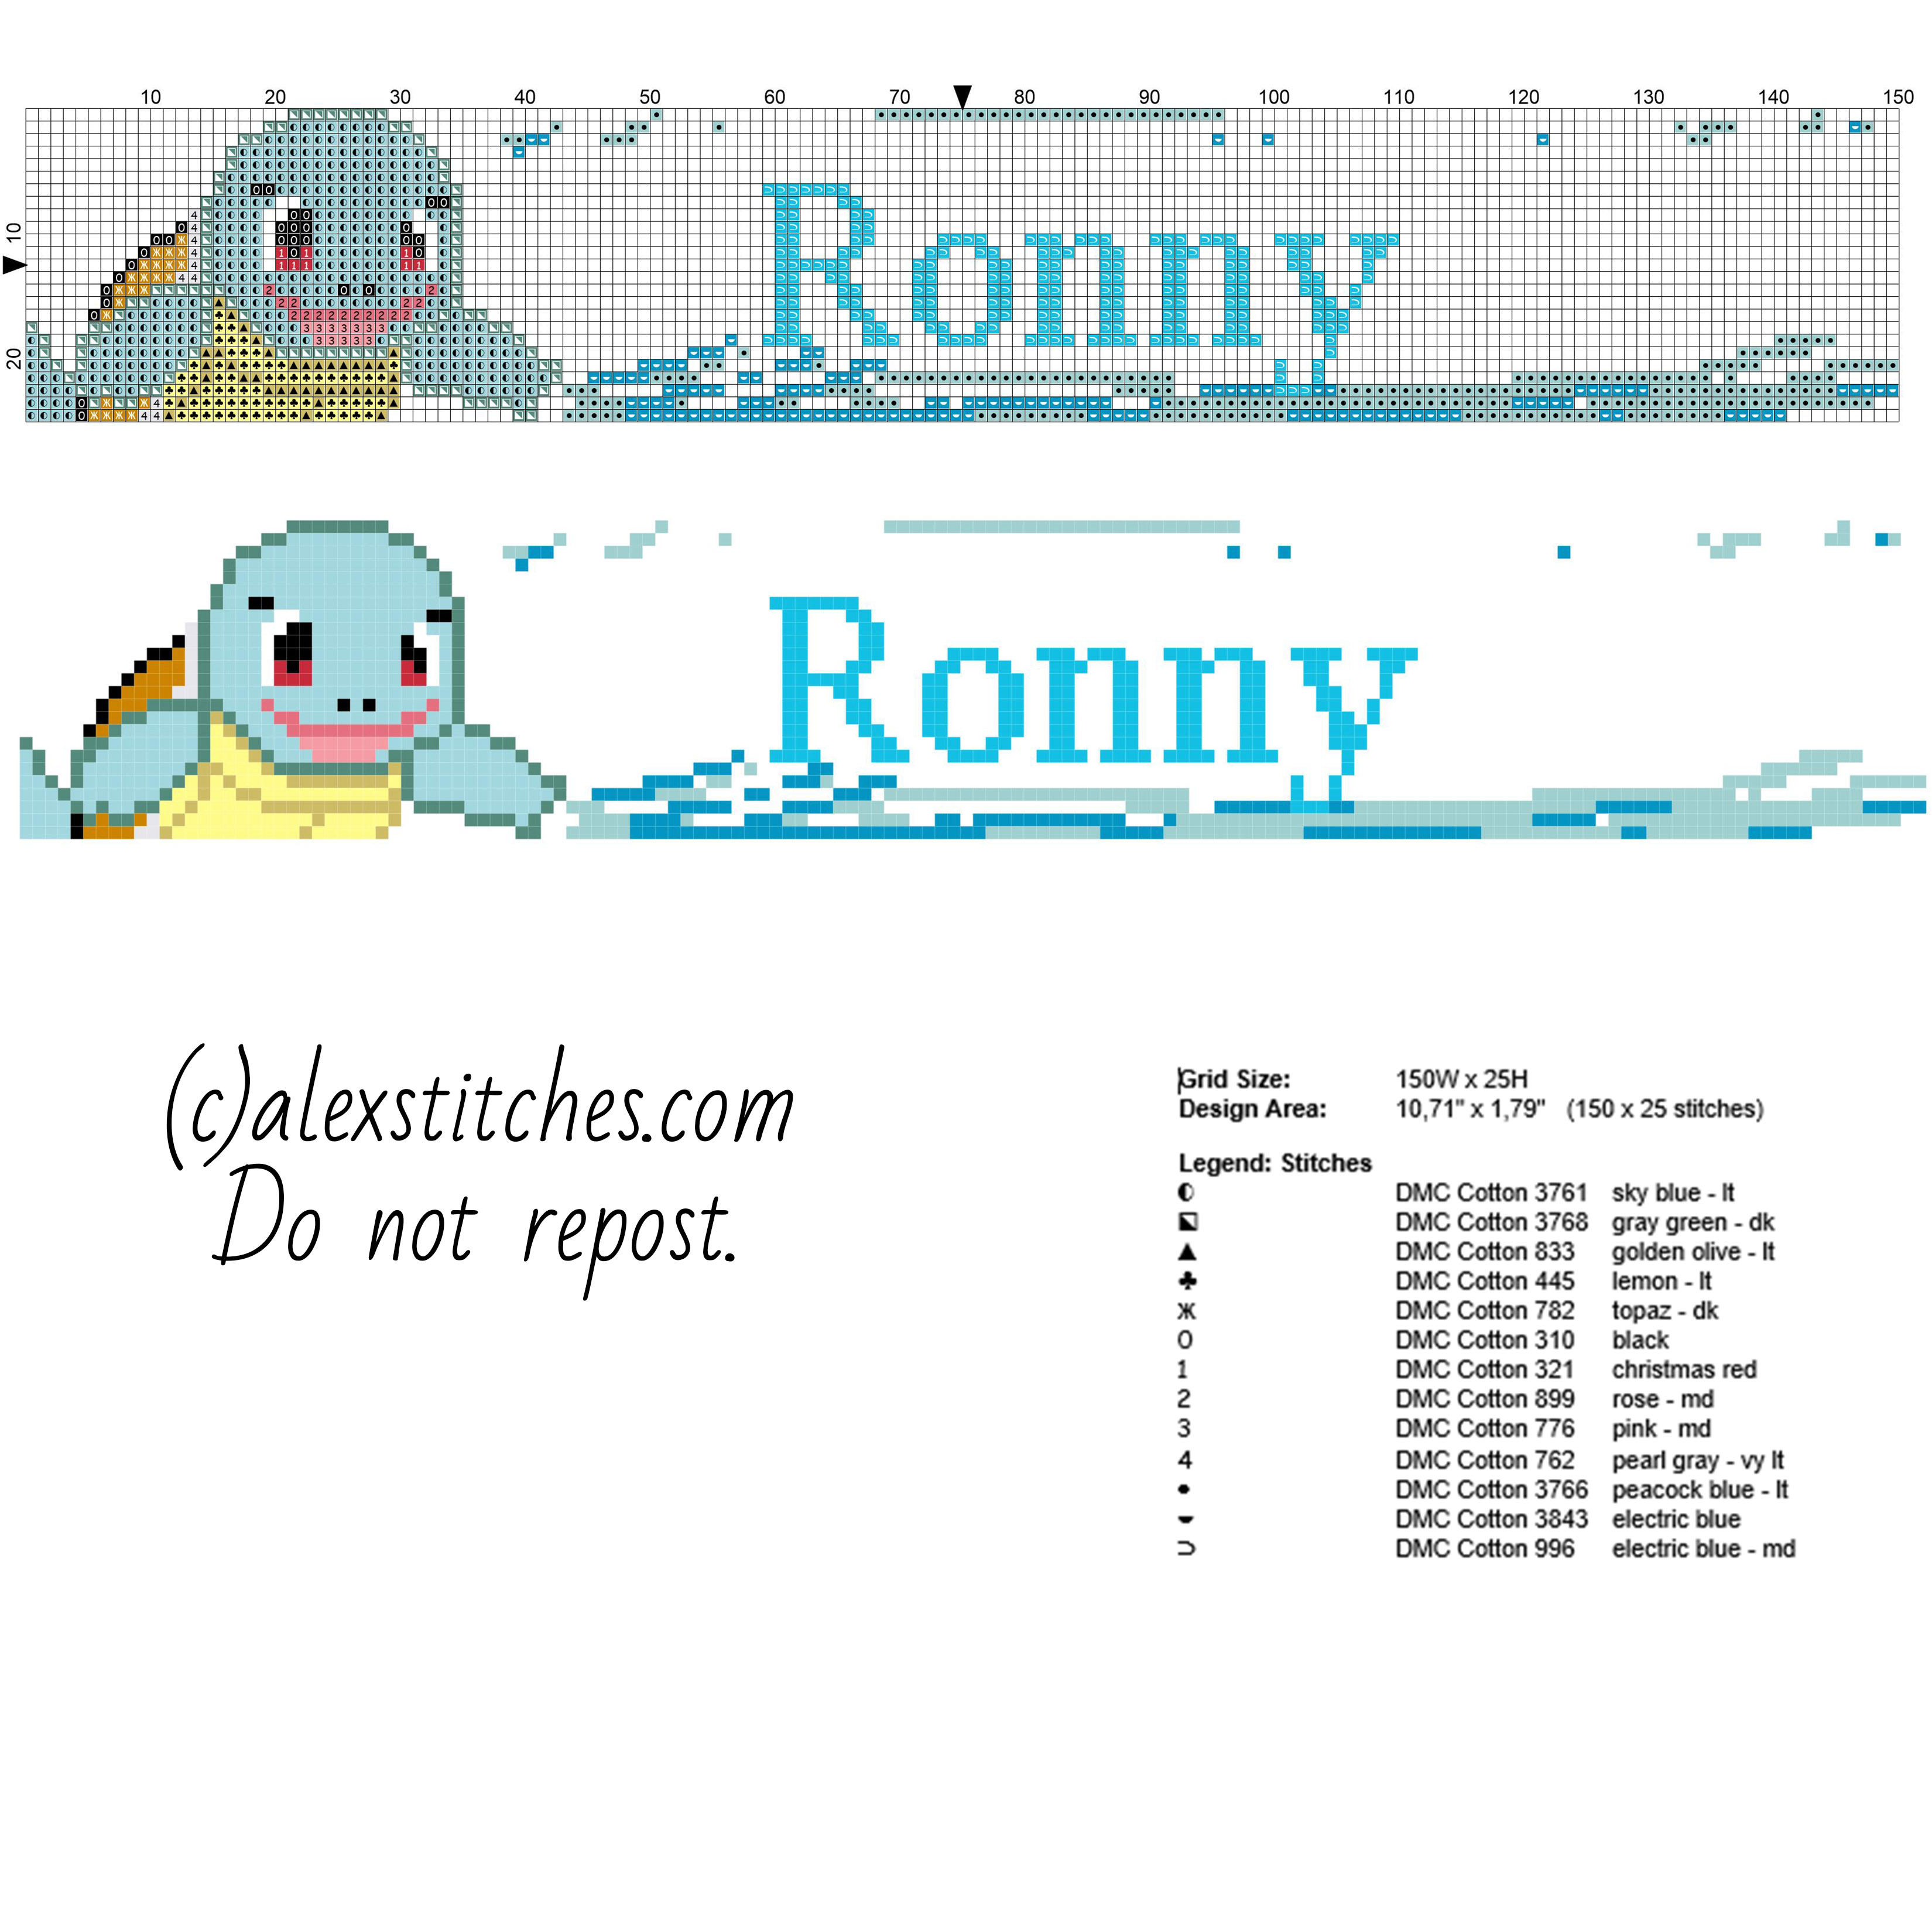 Ronny male name baby with Pokemon Squirtle and water free cross stitch pattern baby bibs idea